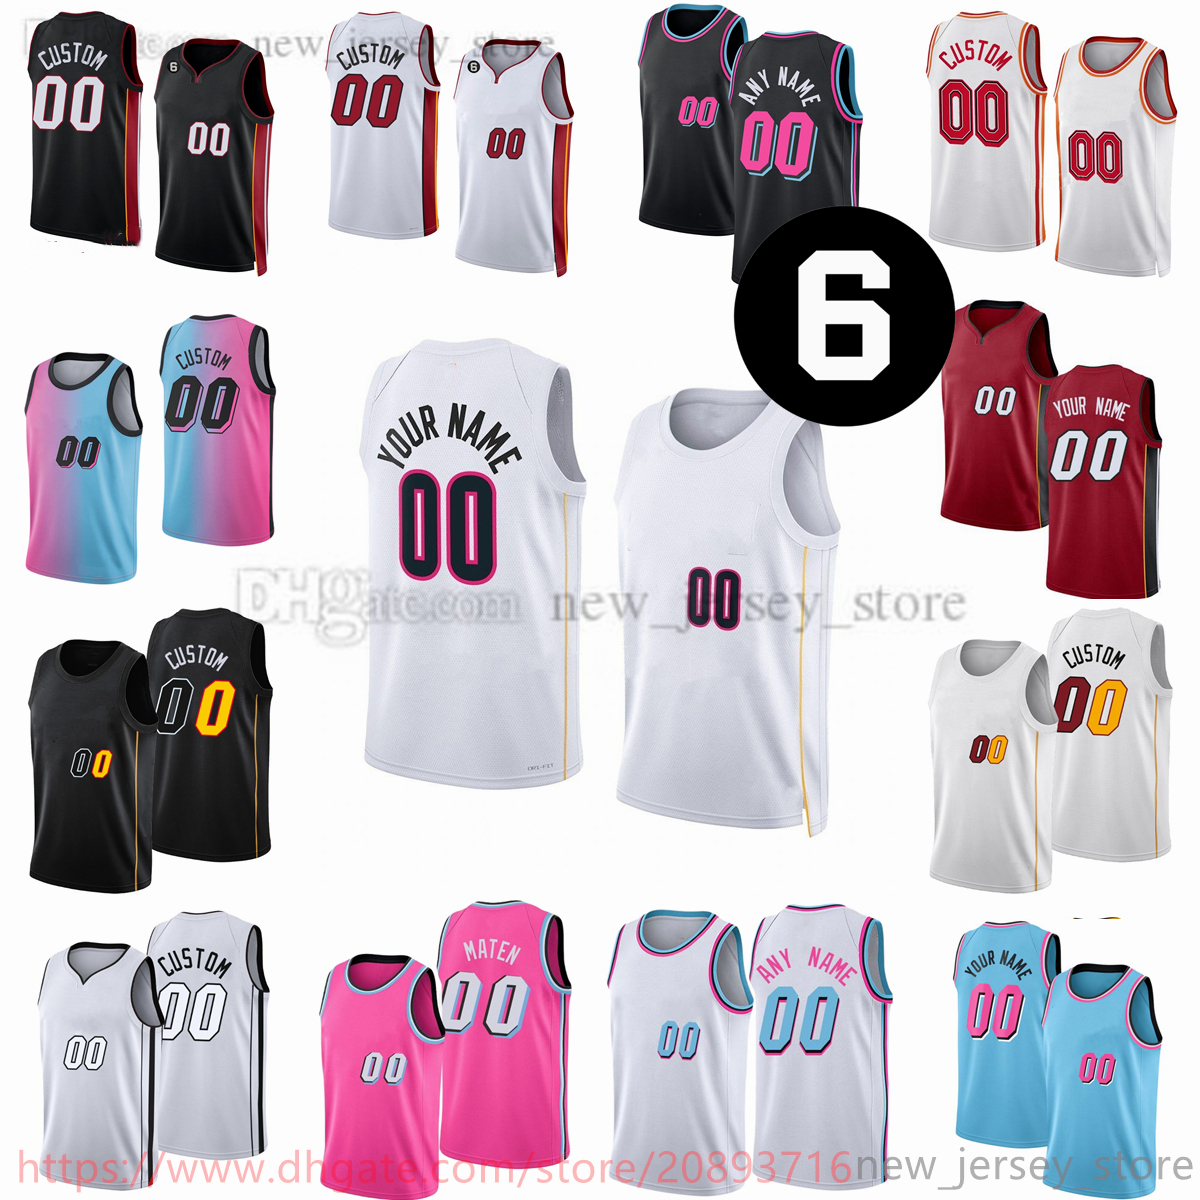 

Custom 2022-23 New season Printed Basketball Jerseys Add 6 patch Black White blue pink Jerseys. Message Any number and name on the order, Printed (with team logo)